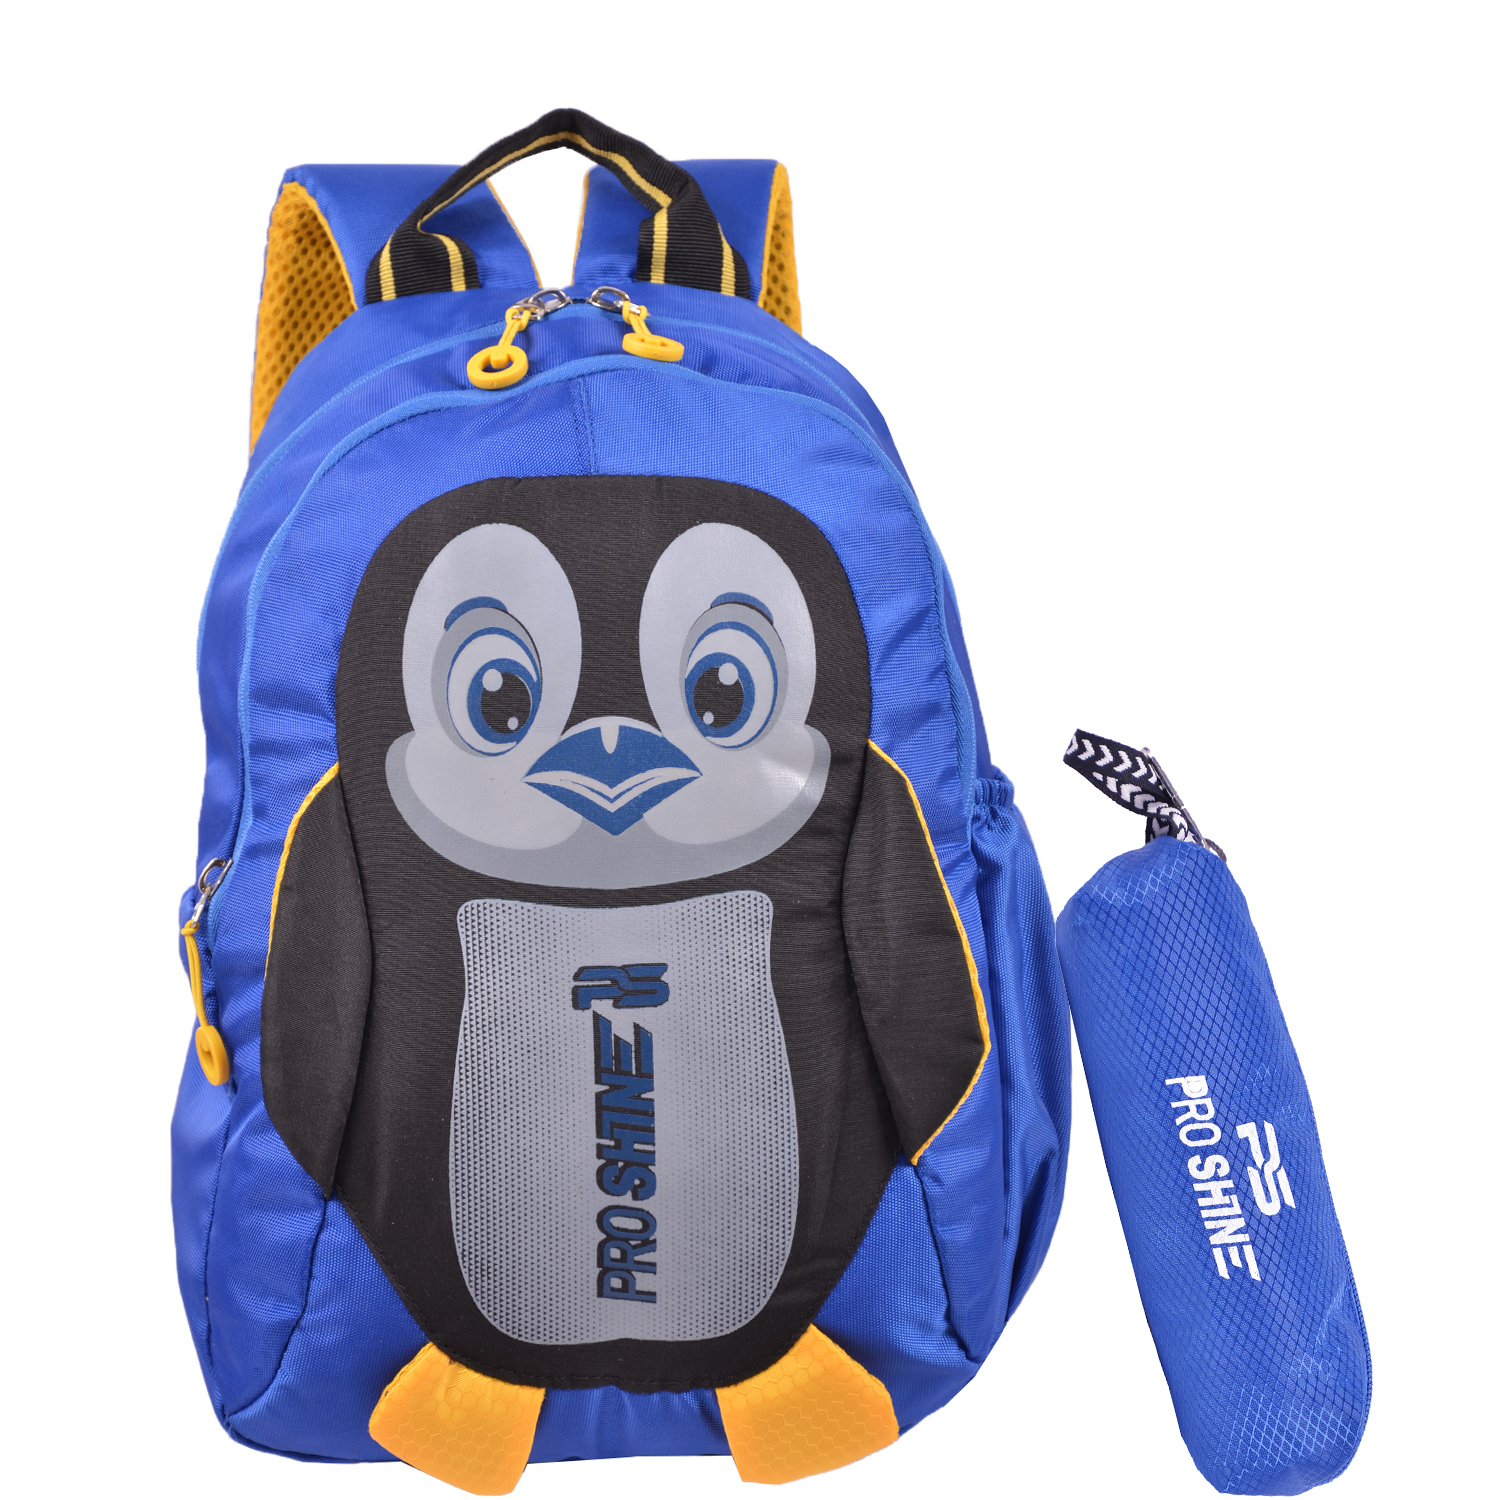 RoshanBags_PROSHINE 14L KIDS SCHOOL BAG FOR KG WITH POUCH A0239 NAVY